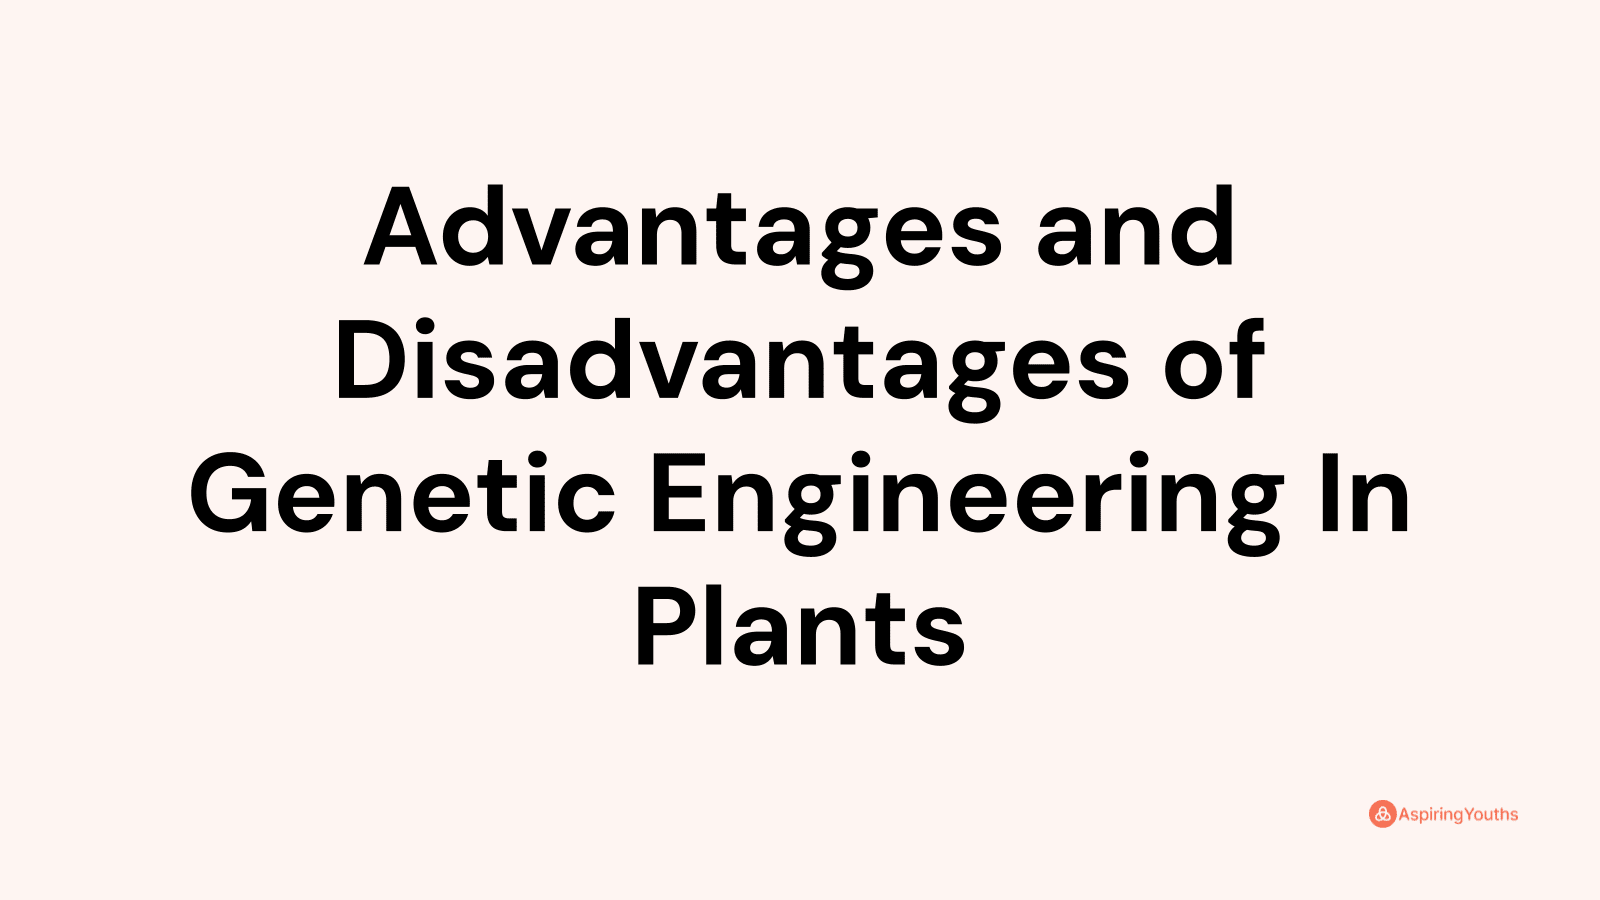 Advantages and disadvantages of Genetic Engineering In Plants